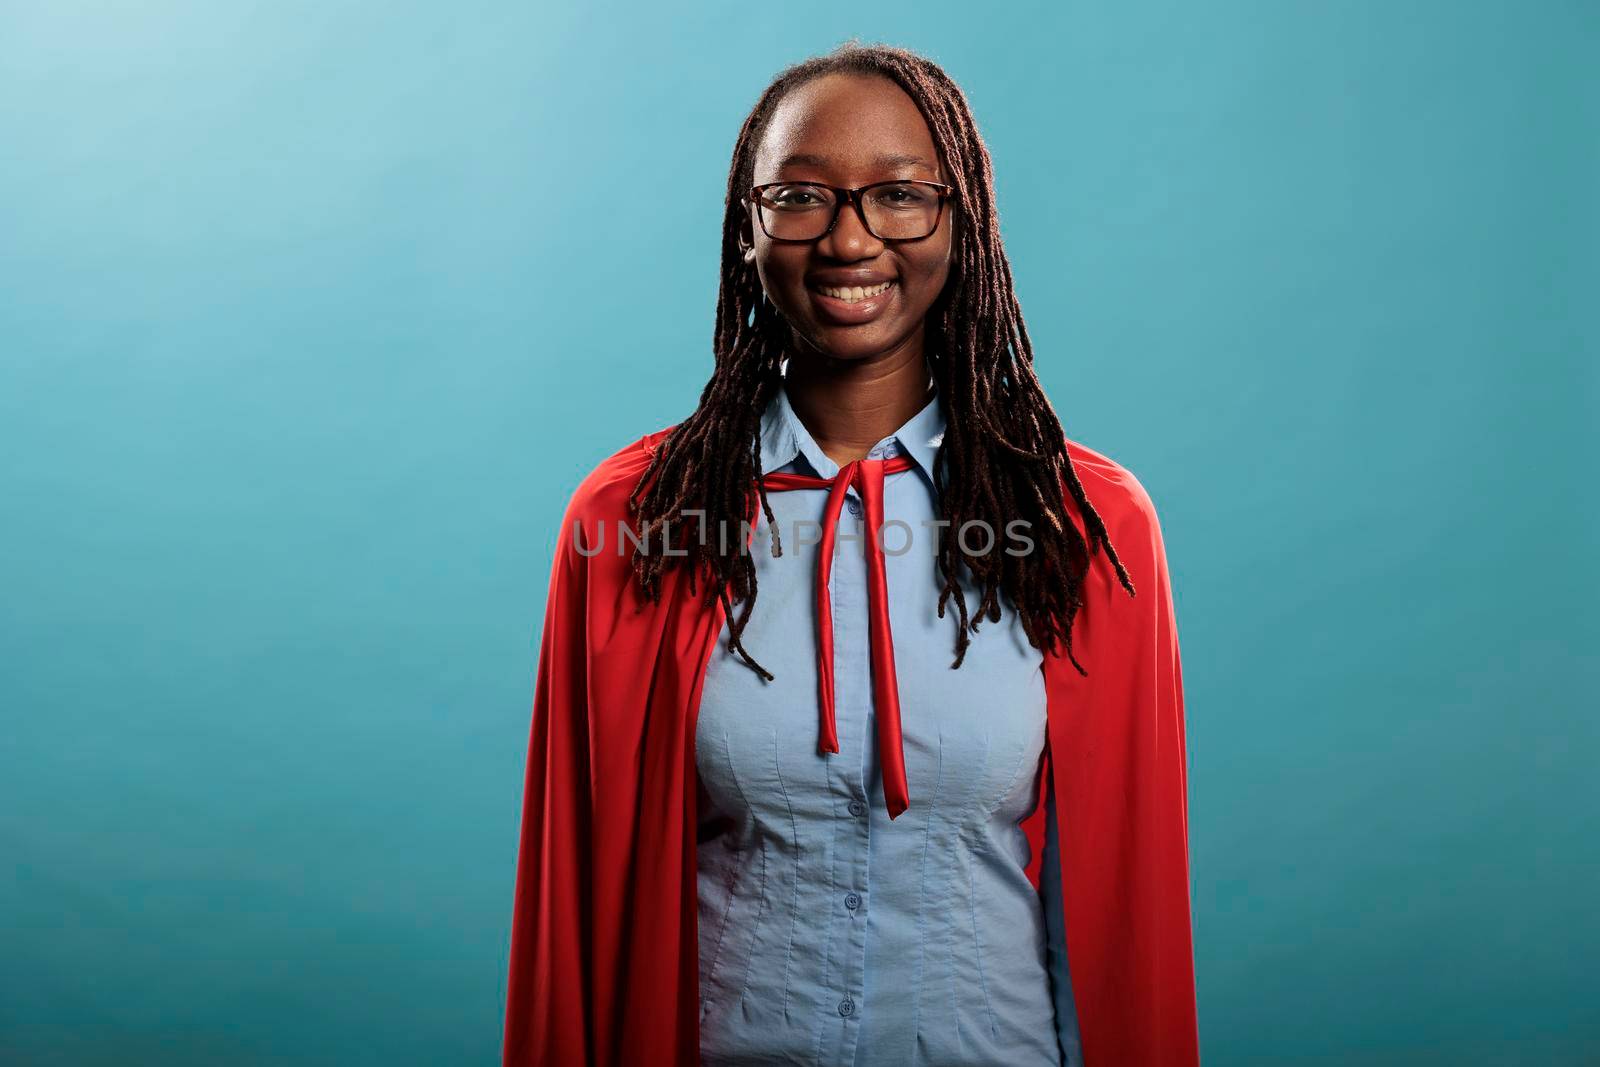 Optimistic looking superhero woman wearing hero costume while smiling heartily at camera on blue background. by DCStudio